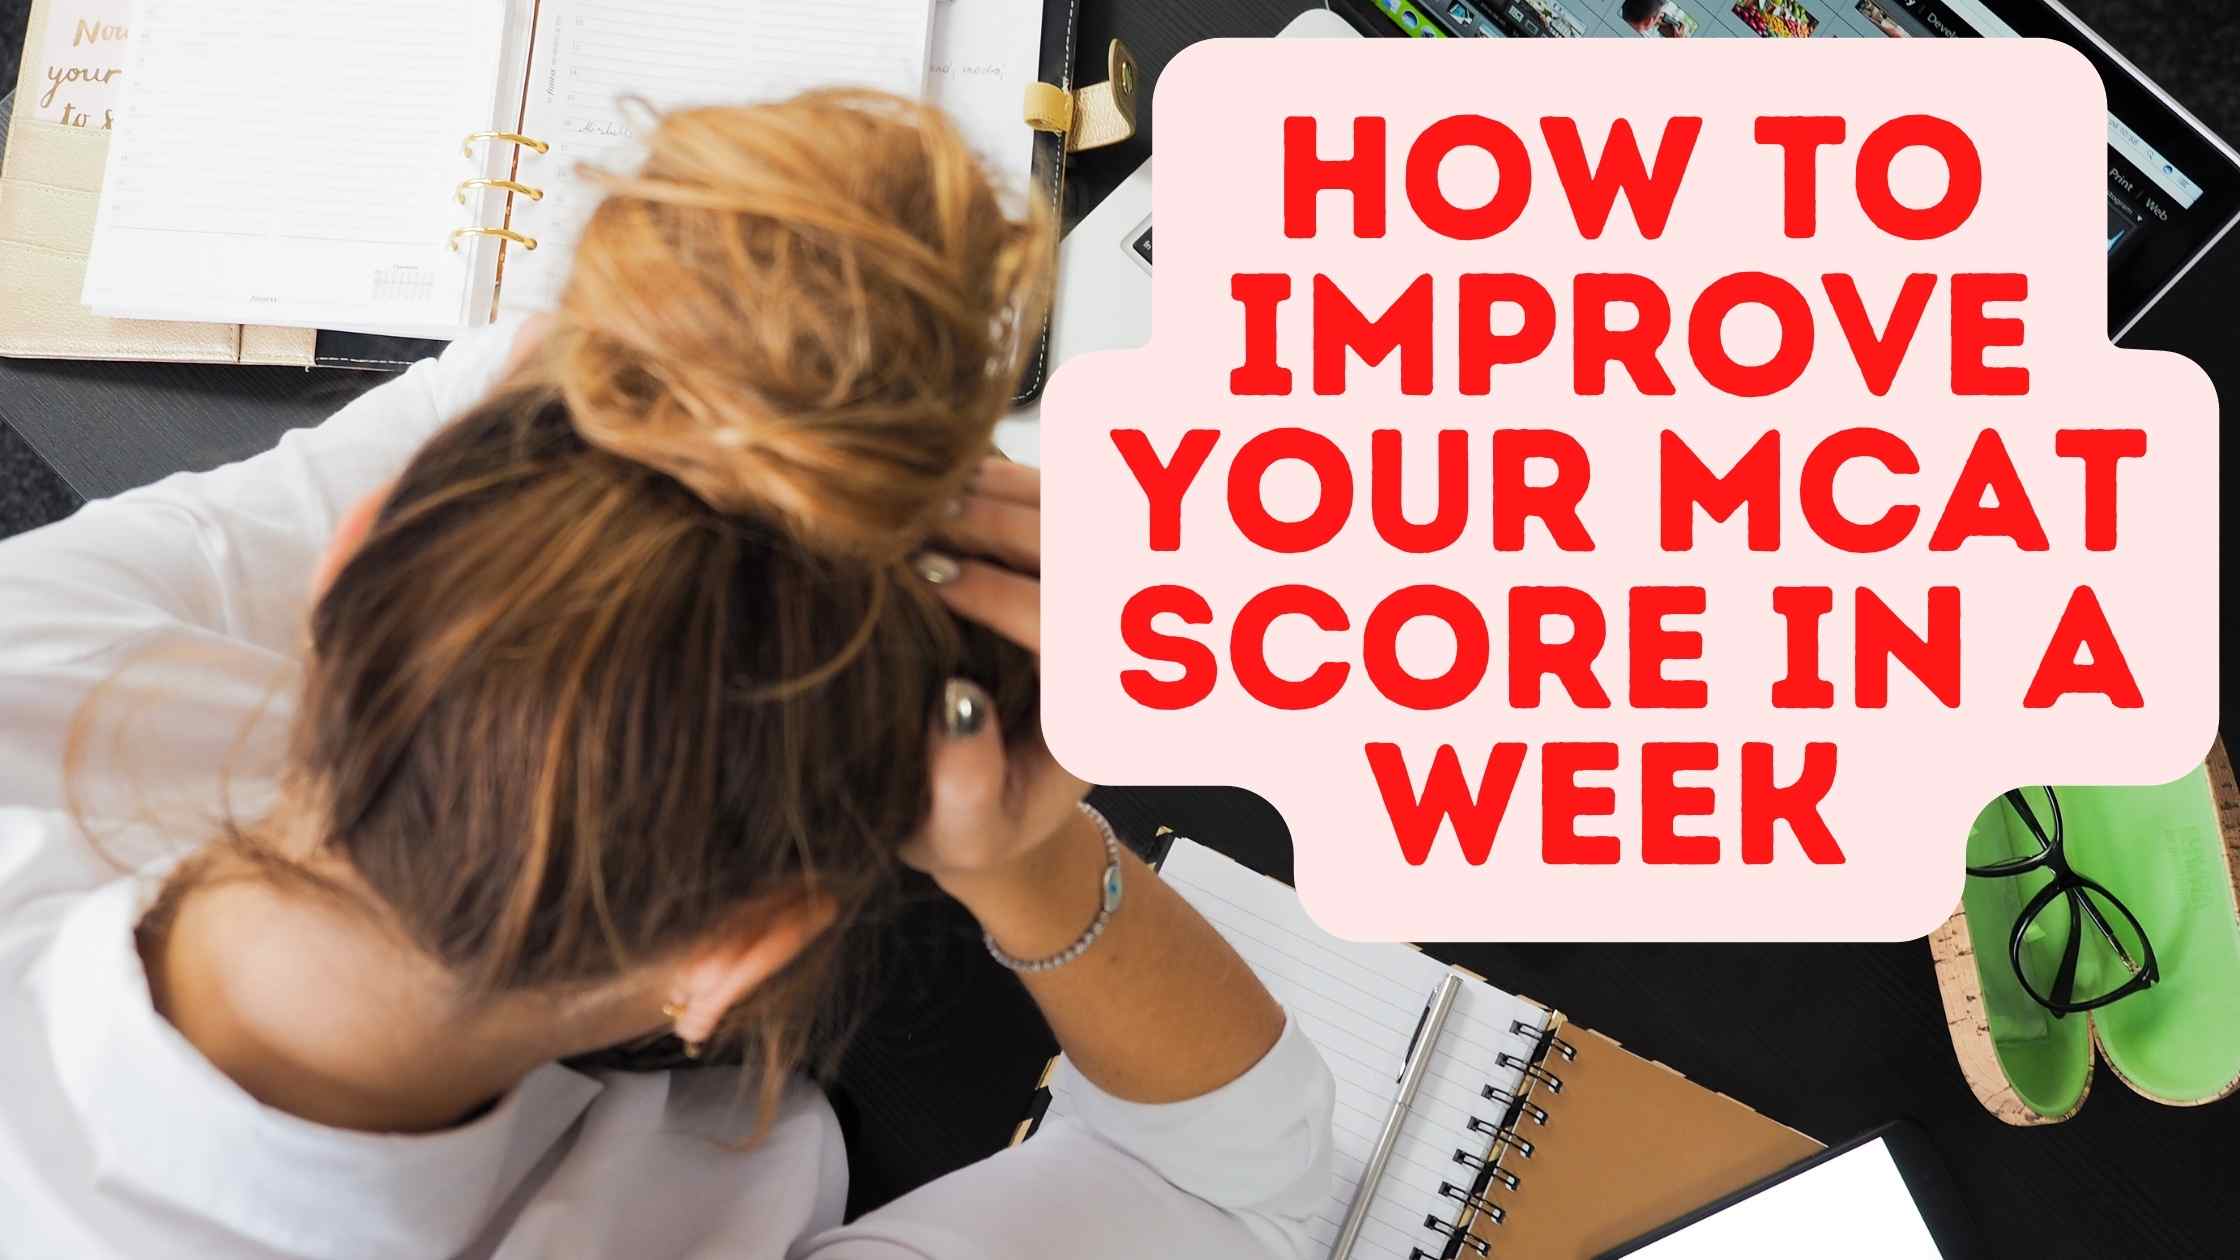 How to improve your MCAT score in a week